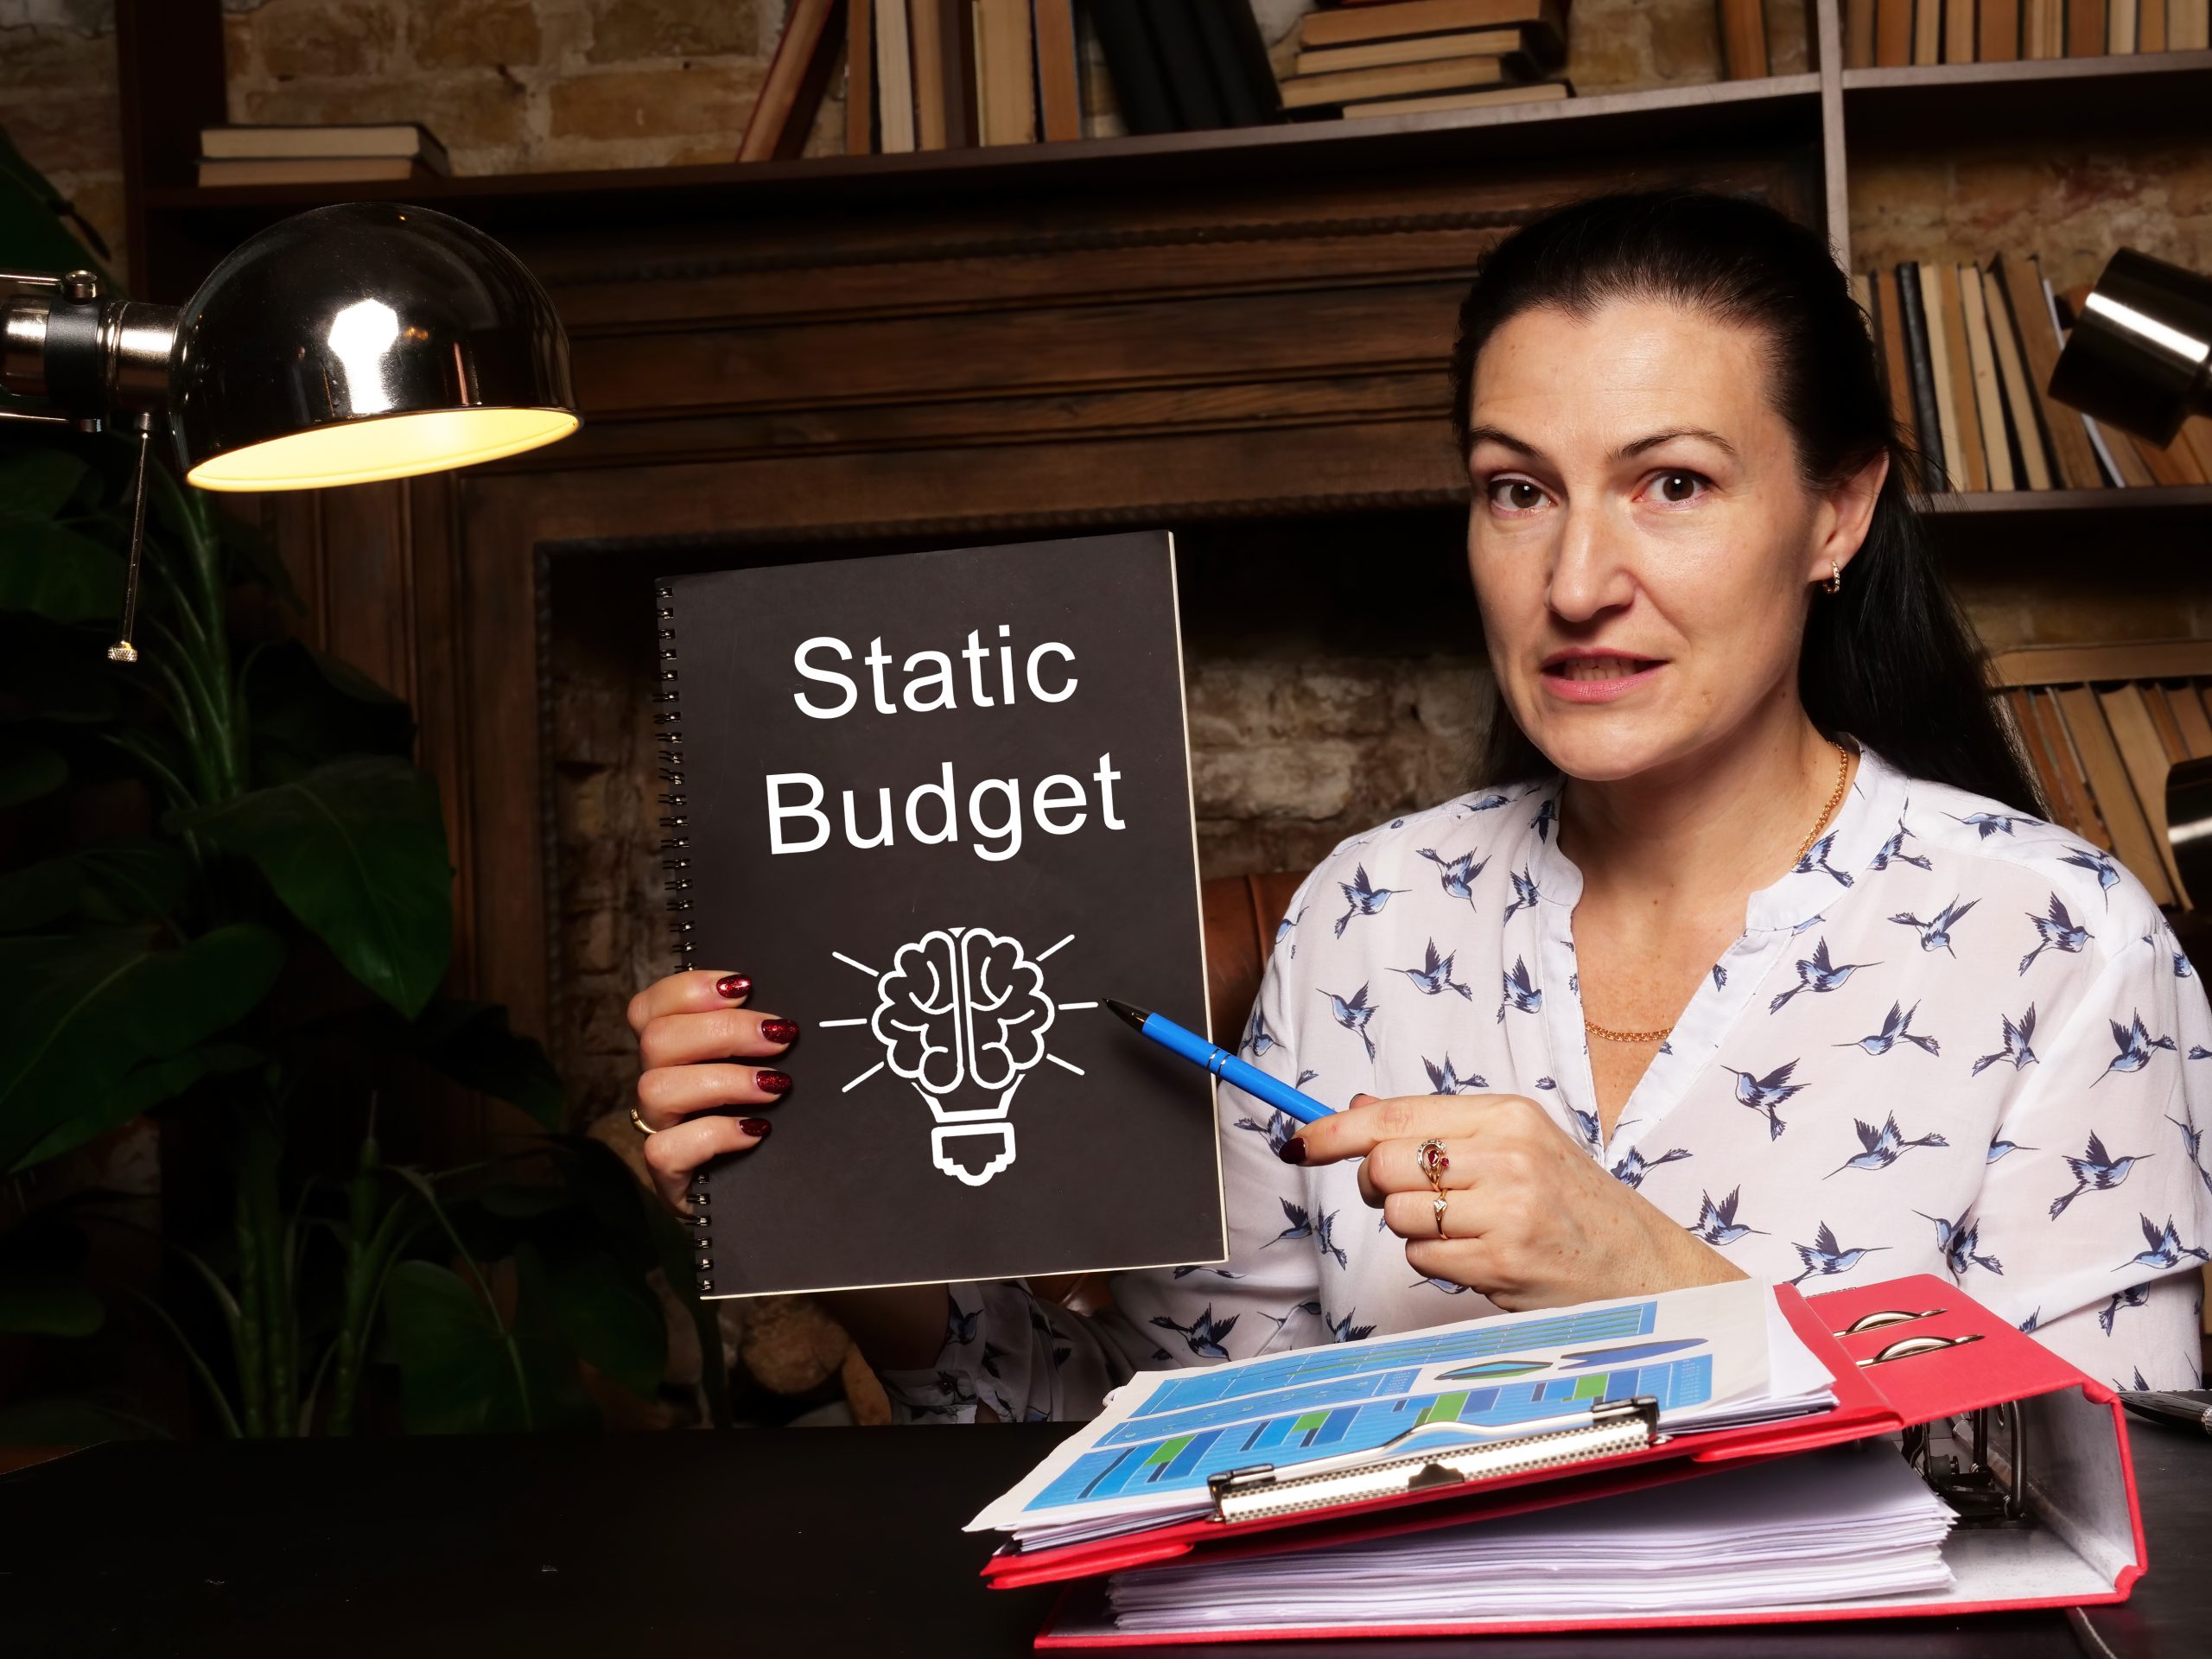 Woman pointing to a textbook with "Static Budget" printed on the front cover